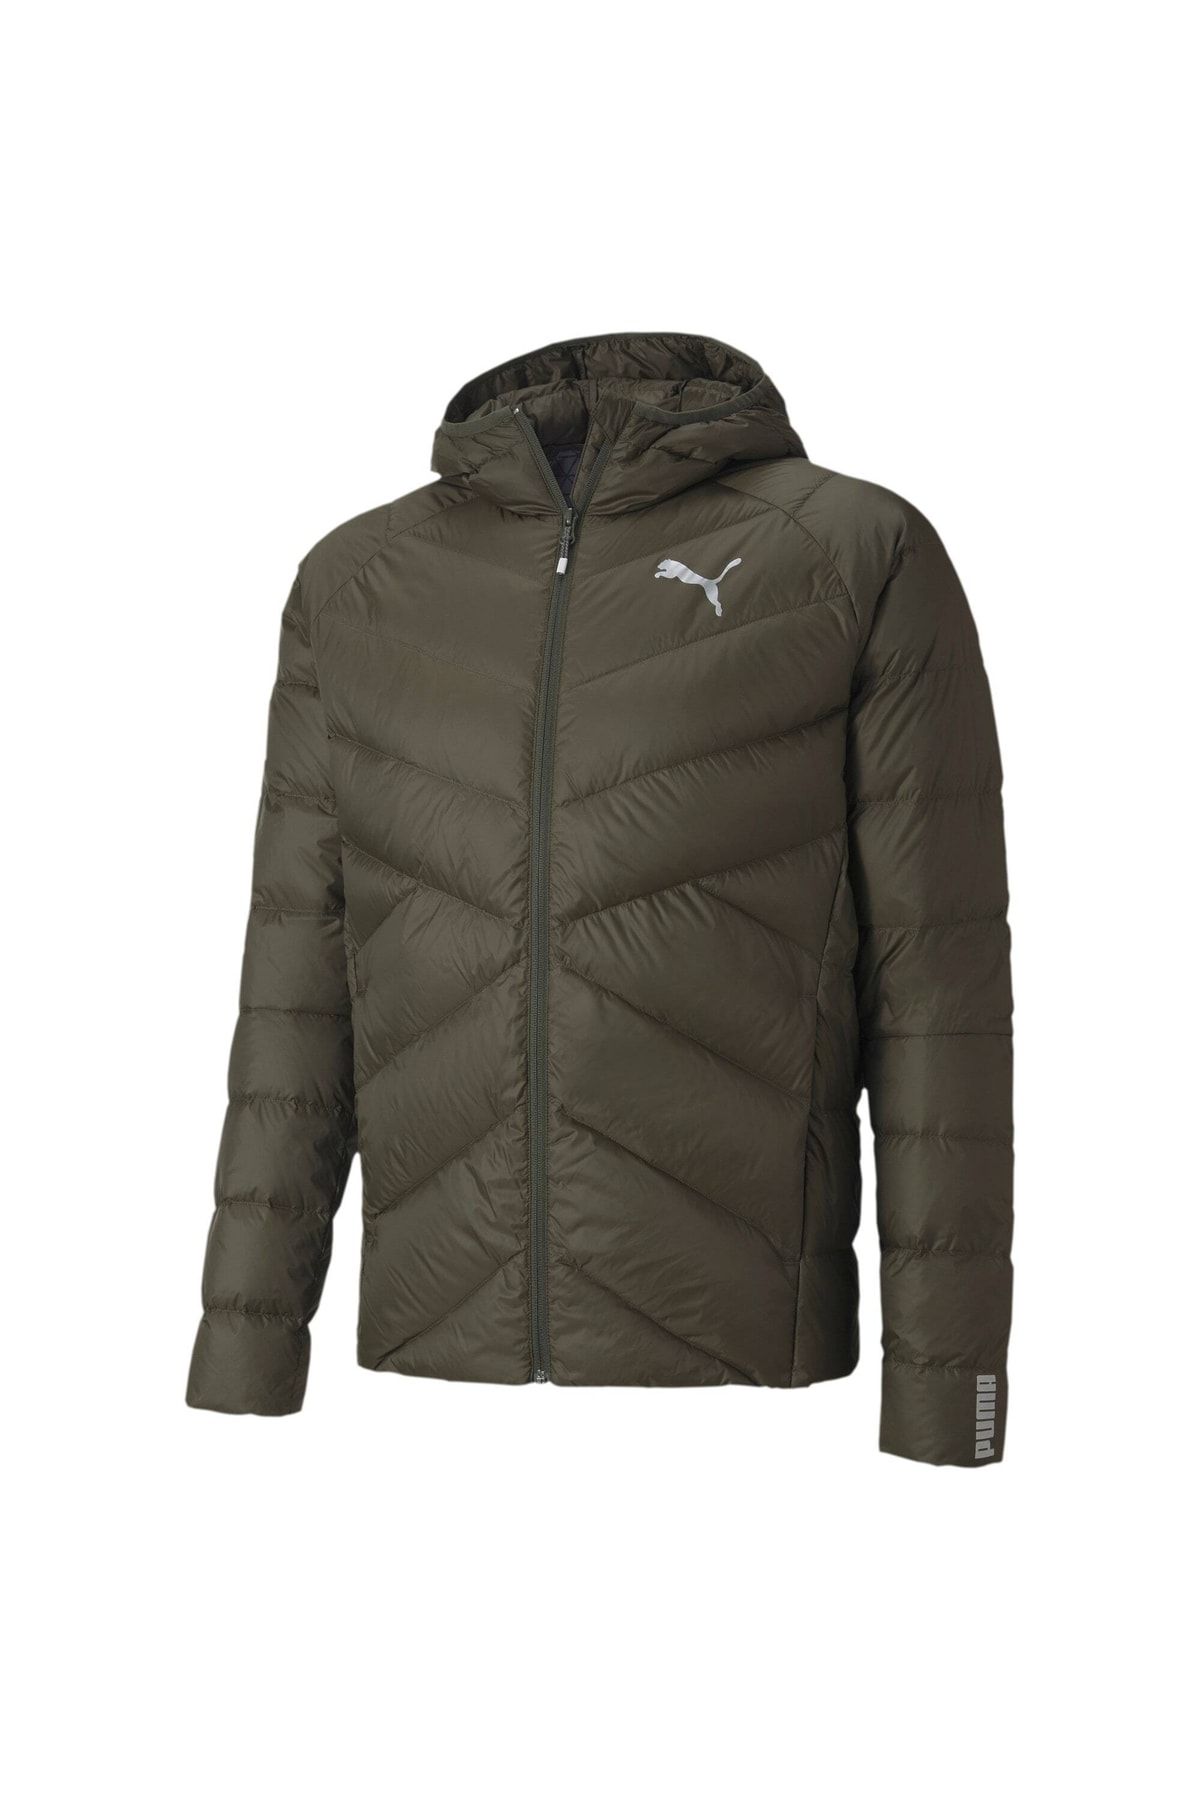 Puma Pwrwarm Packlıte 600 Down Jacket Mont - 58220270